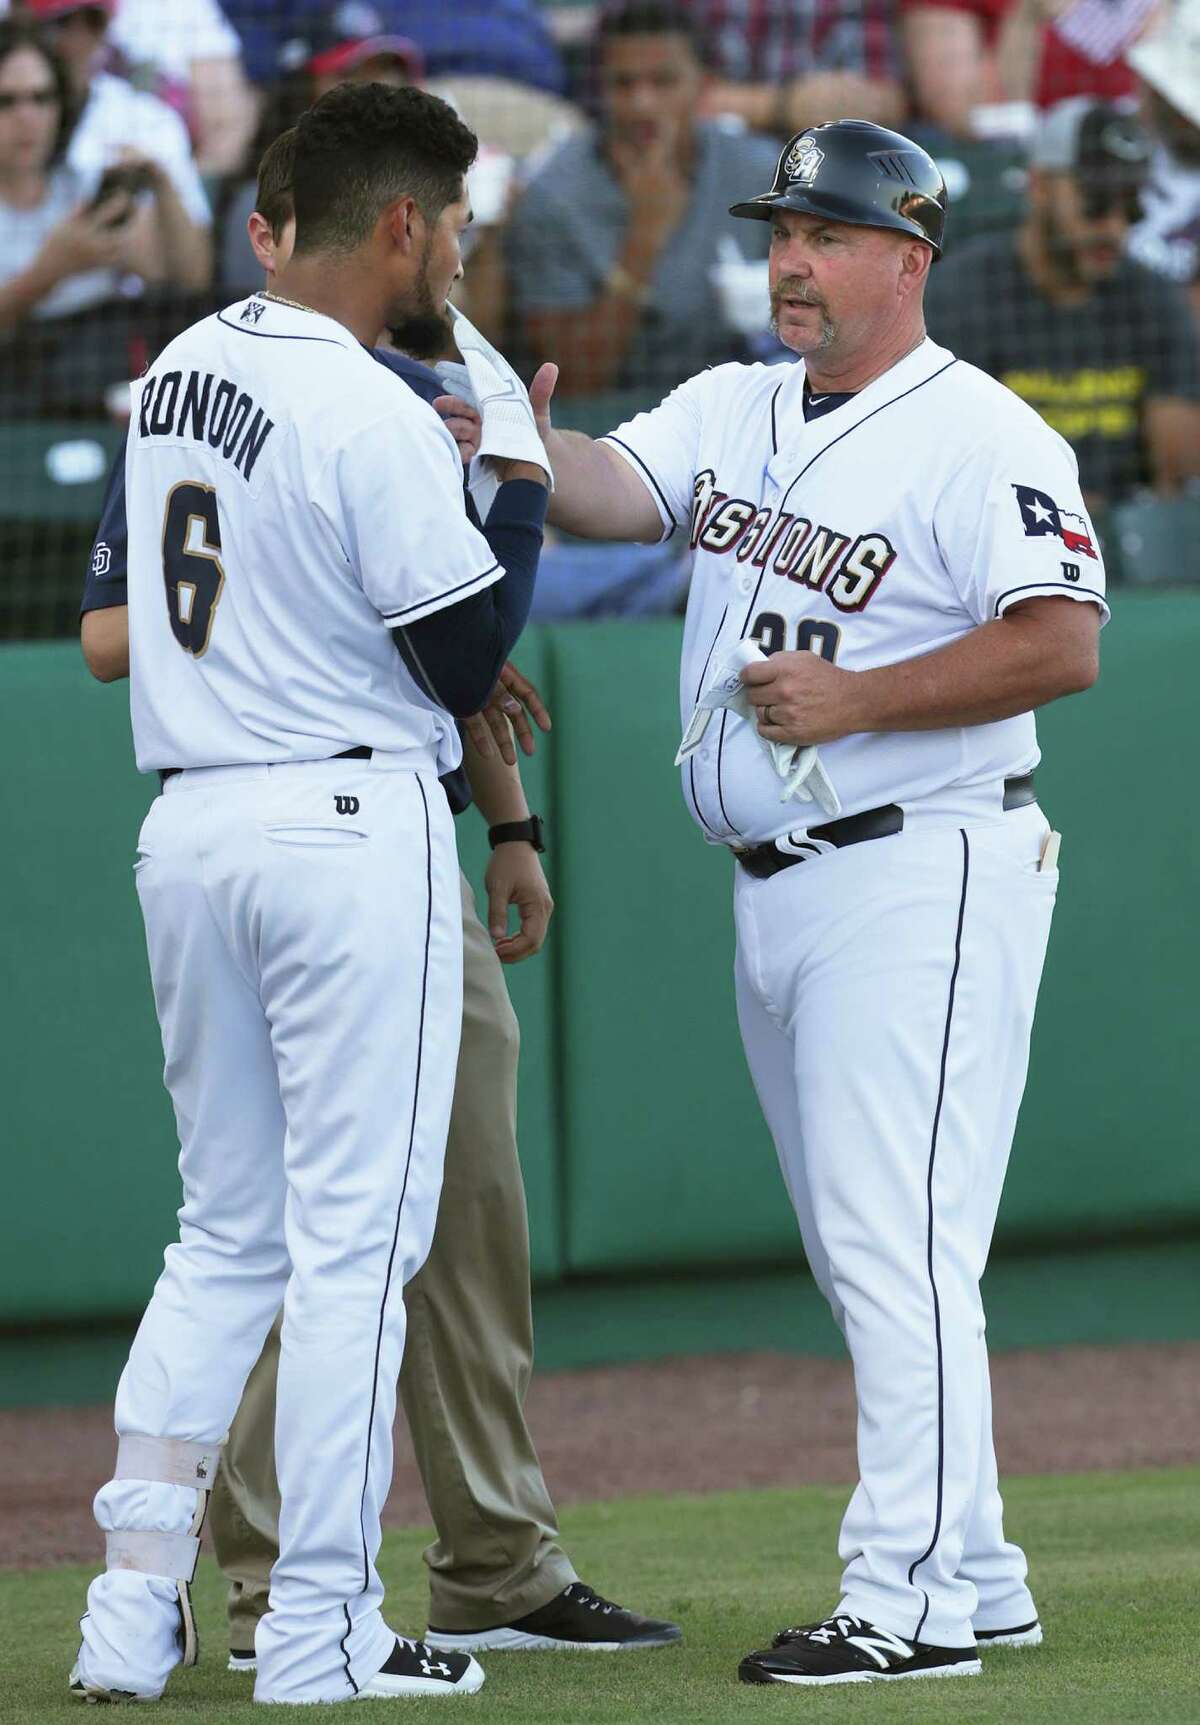 Missions manager Phillip Wellman helps an injured Jose Rondon remove the batter's glove as he coaches his players against the Tulsa Drillers at Wolff Stadium on July 1, 2016.